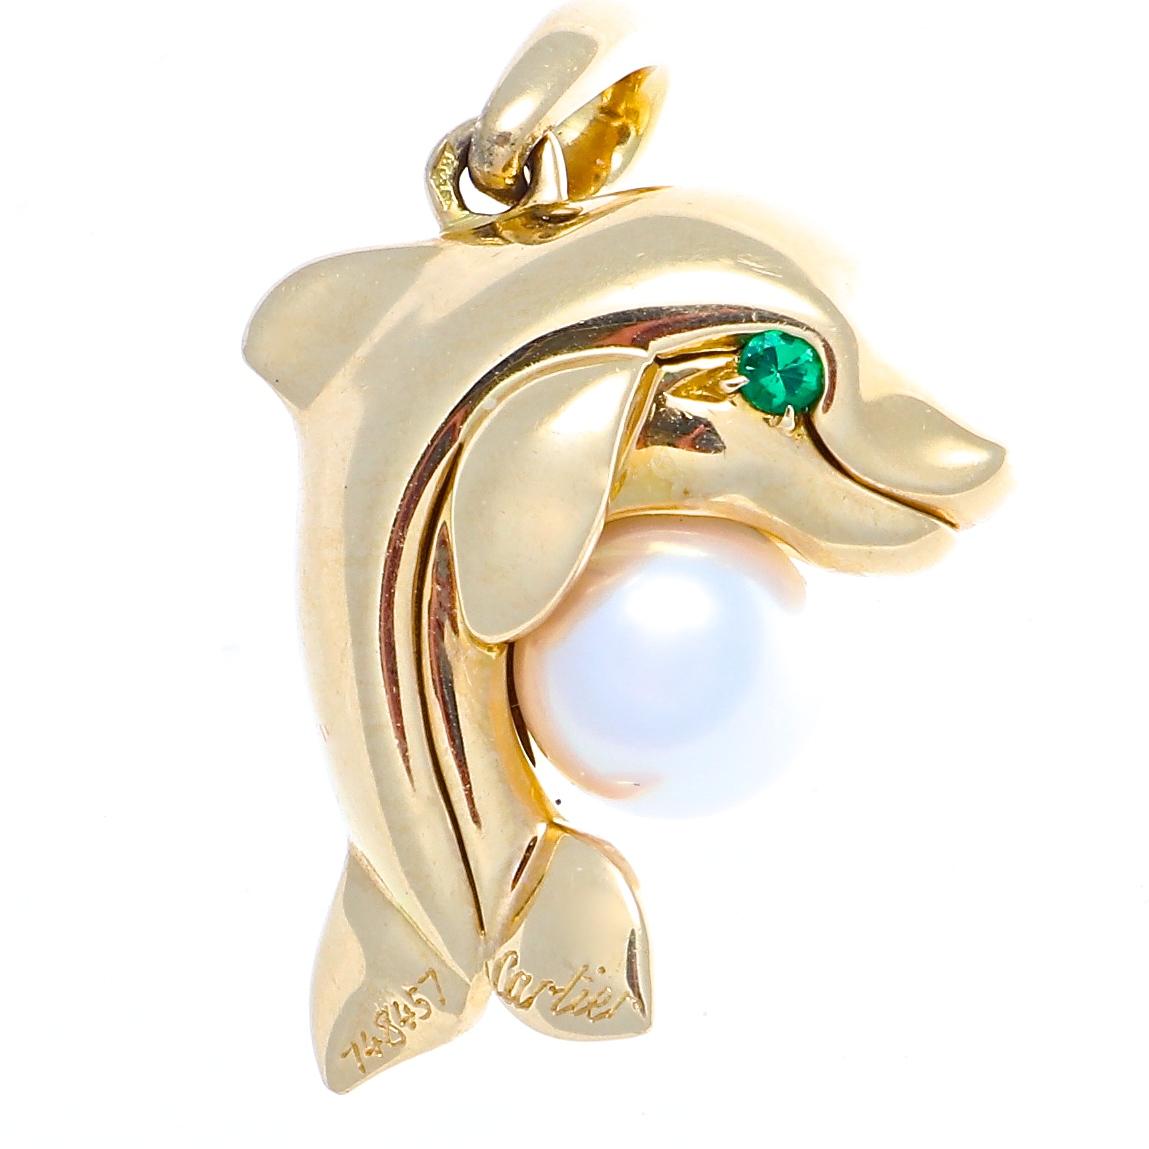 Since the end of the 19th century, Cartier has created an extravagant, unique and elegant menagerie. With influences from all over the globe this collection defines and reflects its mastery and expertise. A design as playful as the mammal. Featured